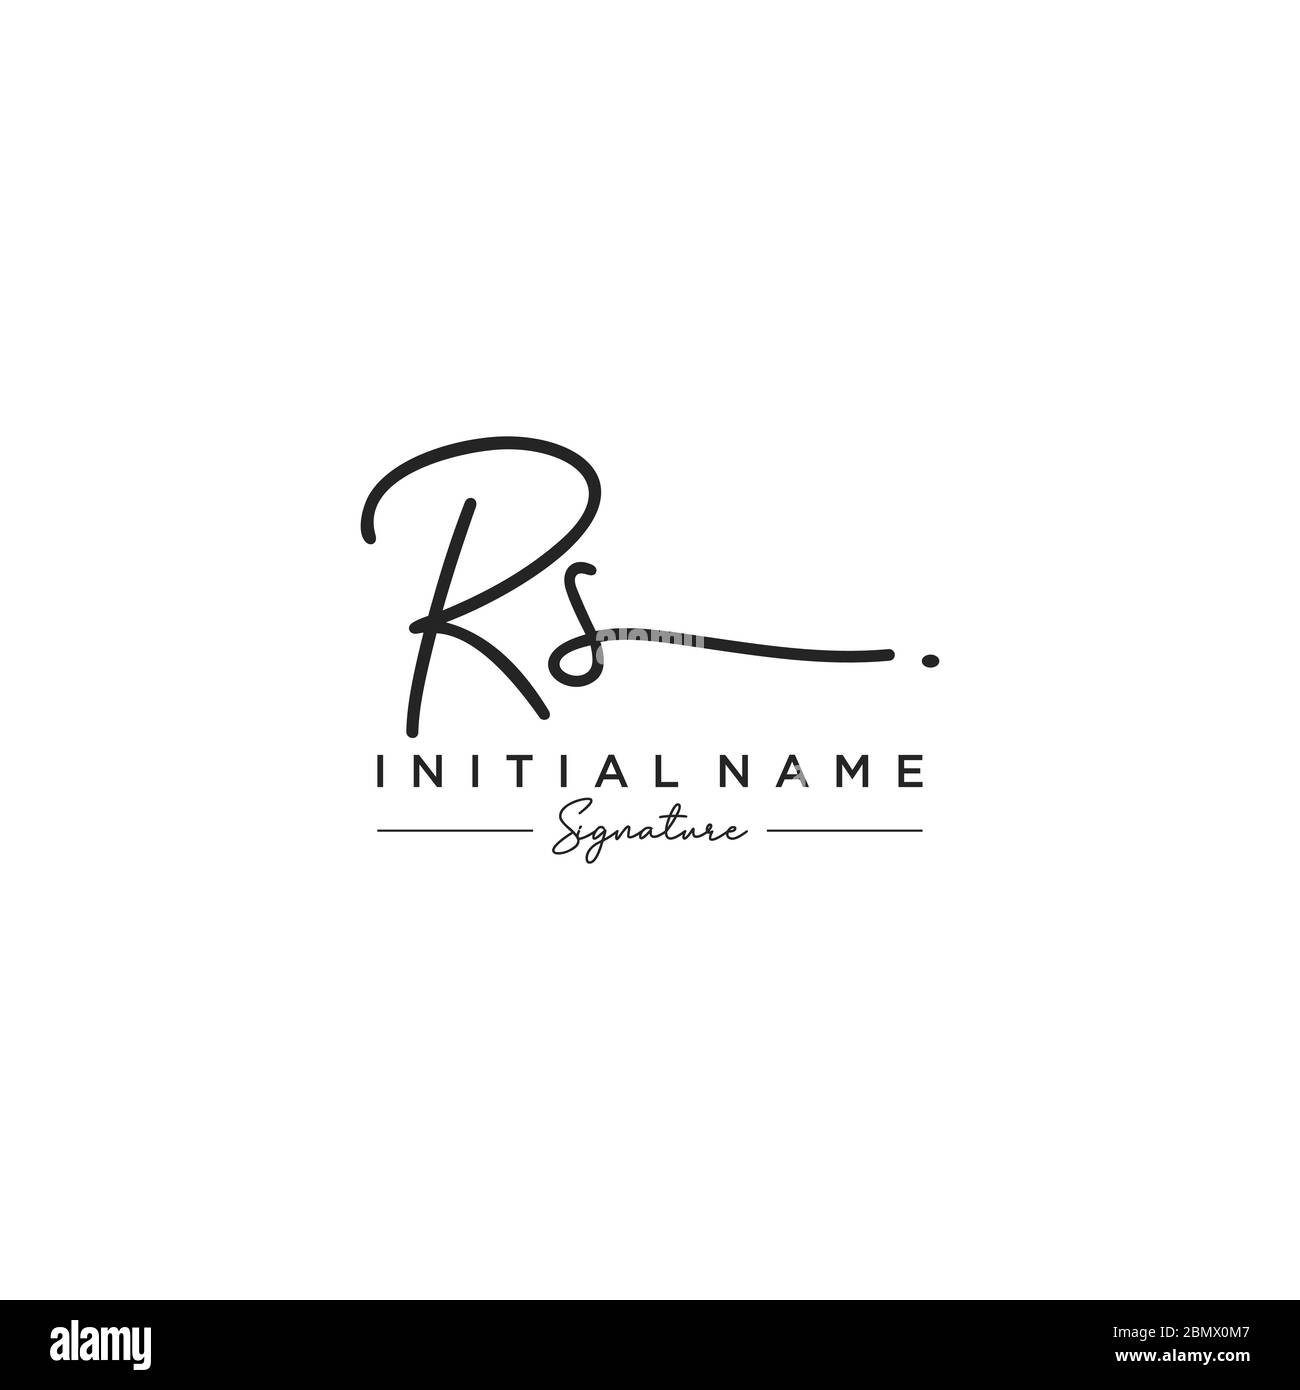 Initial Rs Letter Logo Design Vector Graphic Concept Illustrations Stock  Illustration - Download Image Now - iStock